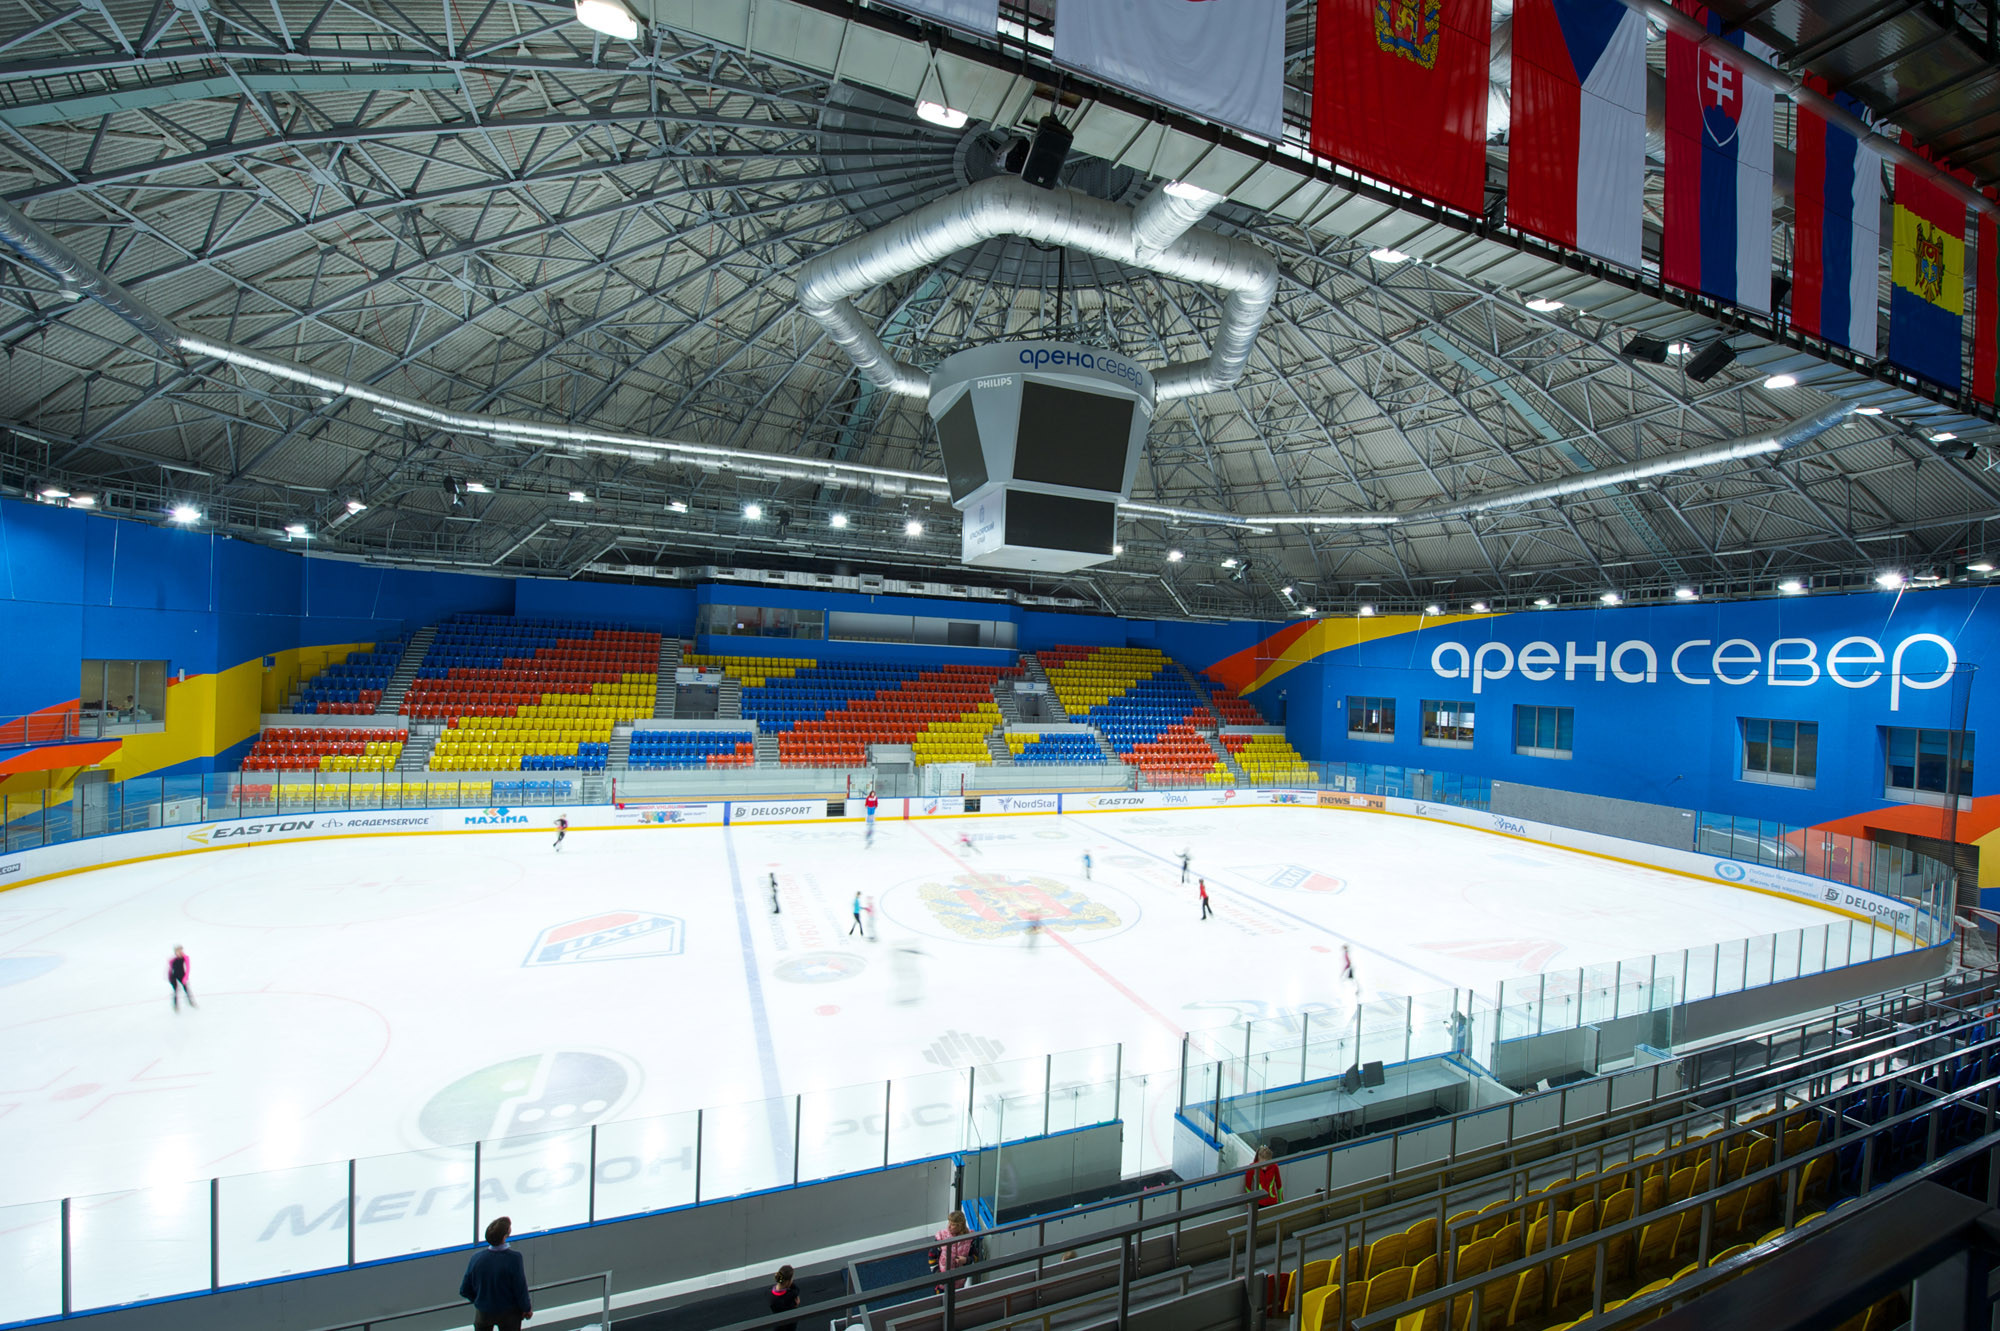 Krasnoyarsk 2019 have received a special budget from the Russian Federal Government ©FISU